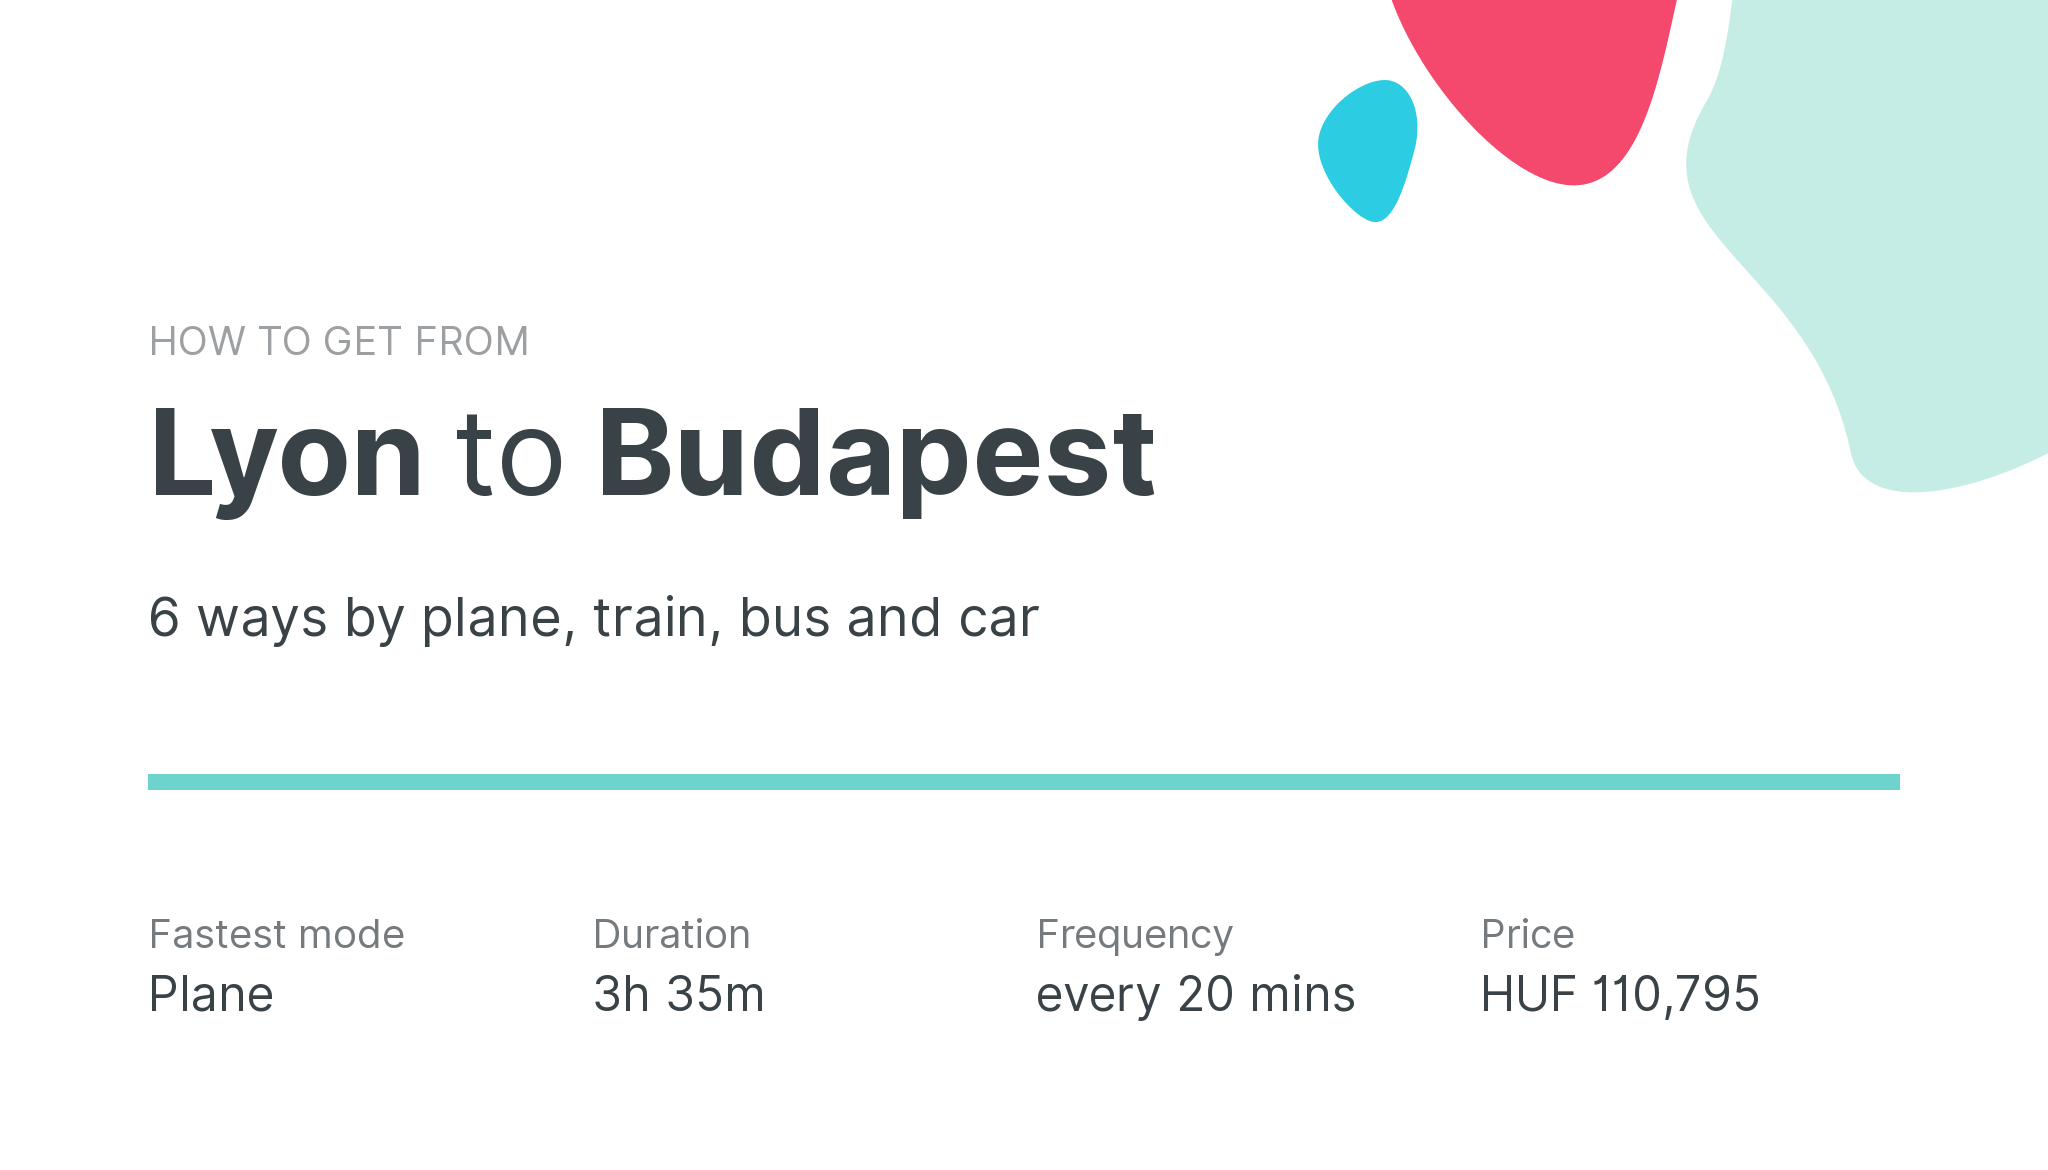 How do I get from Lyon to Budapest